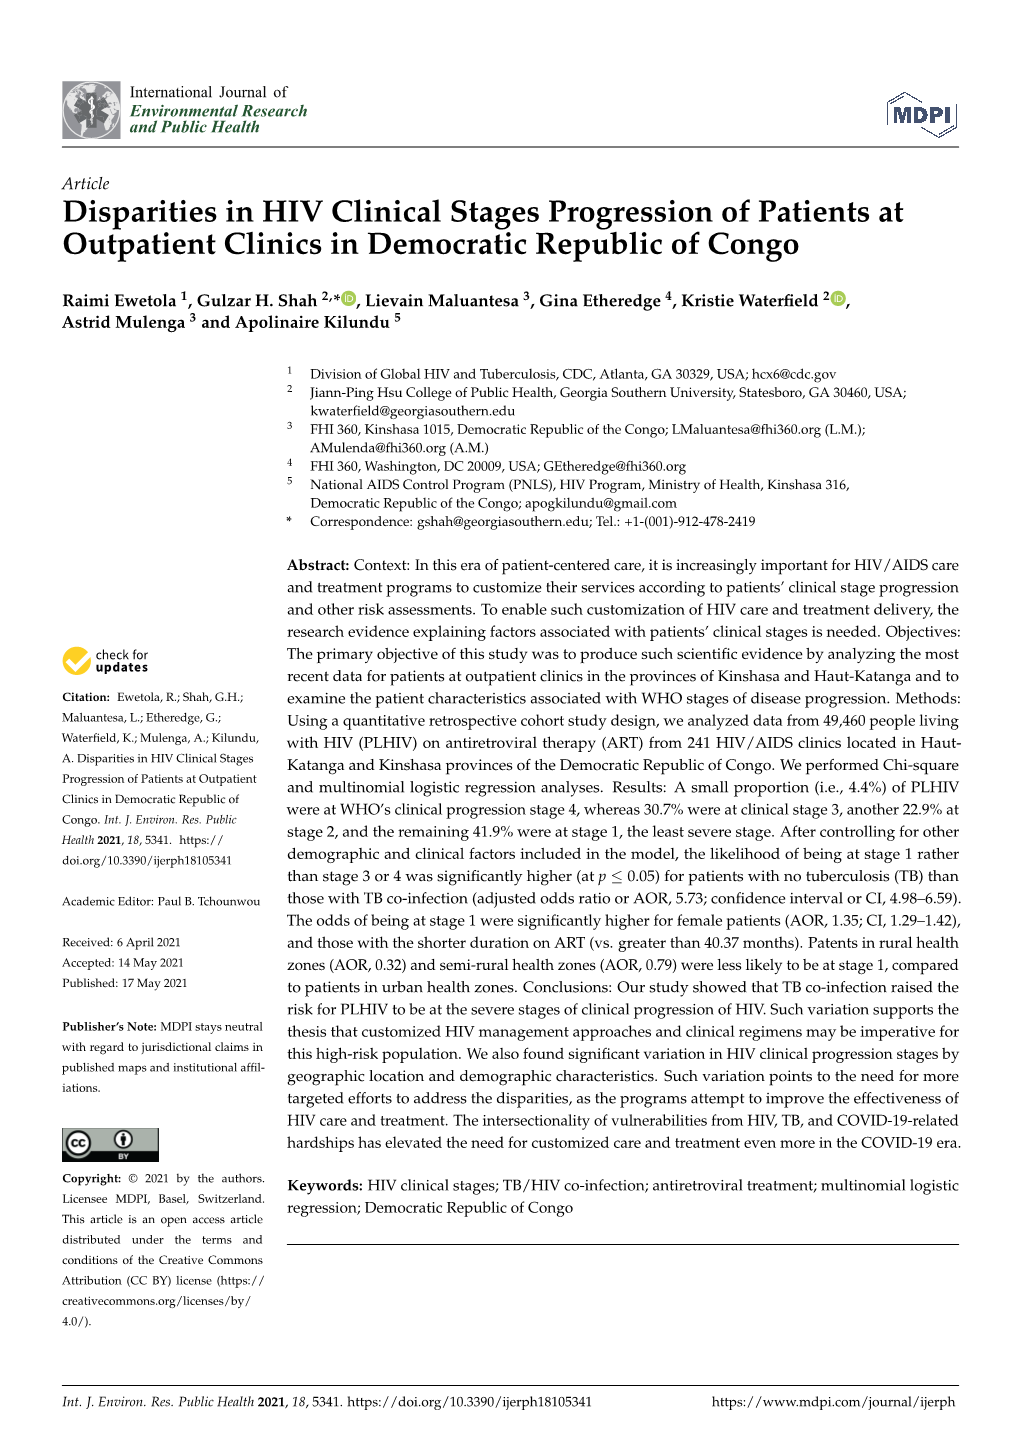 Disparities in HIV Clinical Stages Progression of Patients at Outpatient Clinics in Democratic Republic of Congo